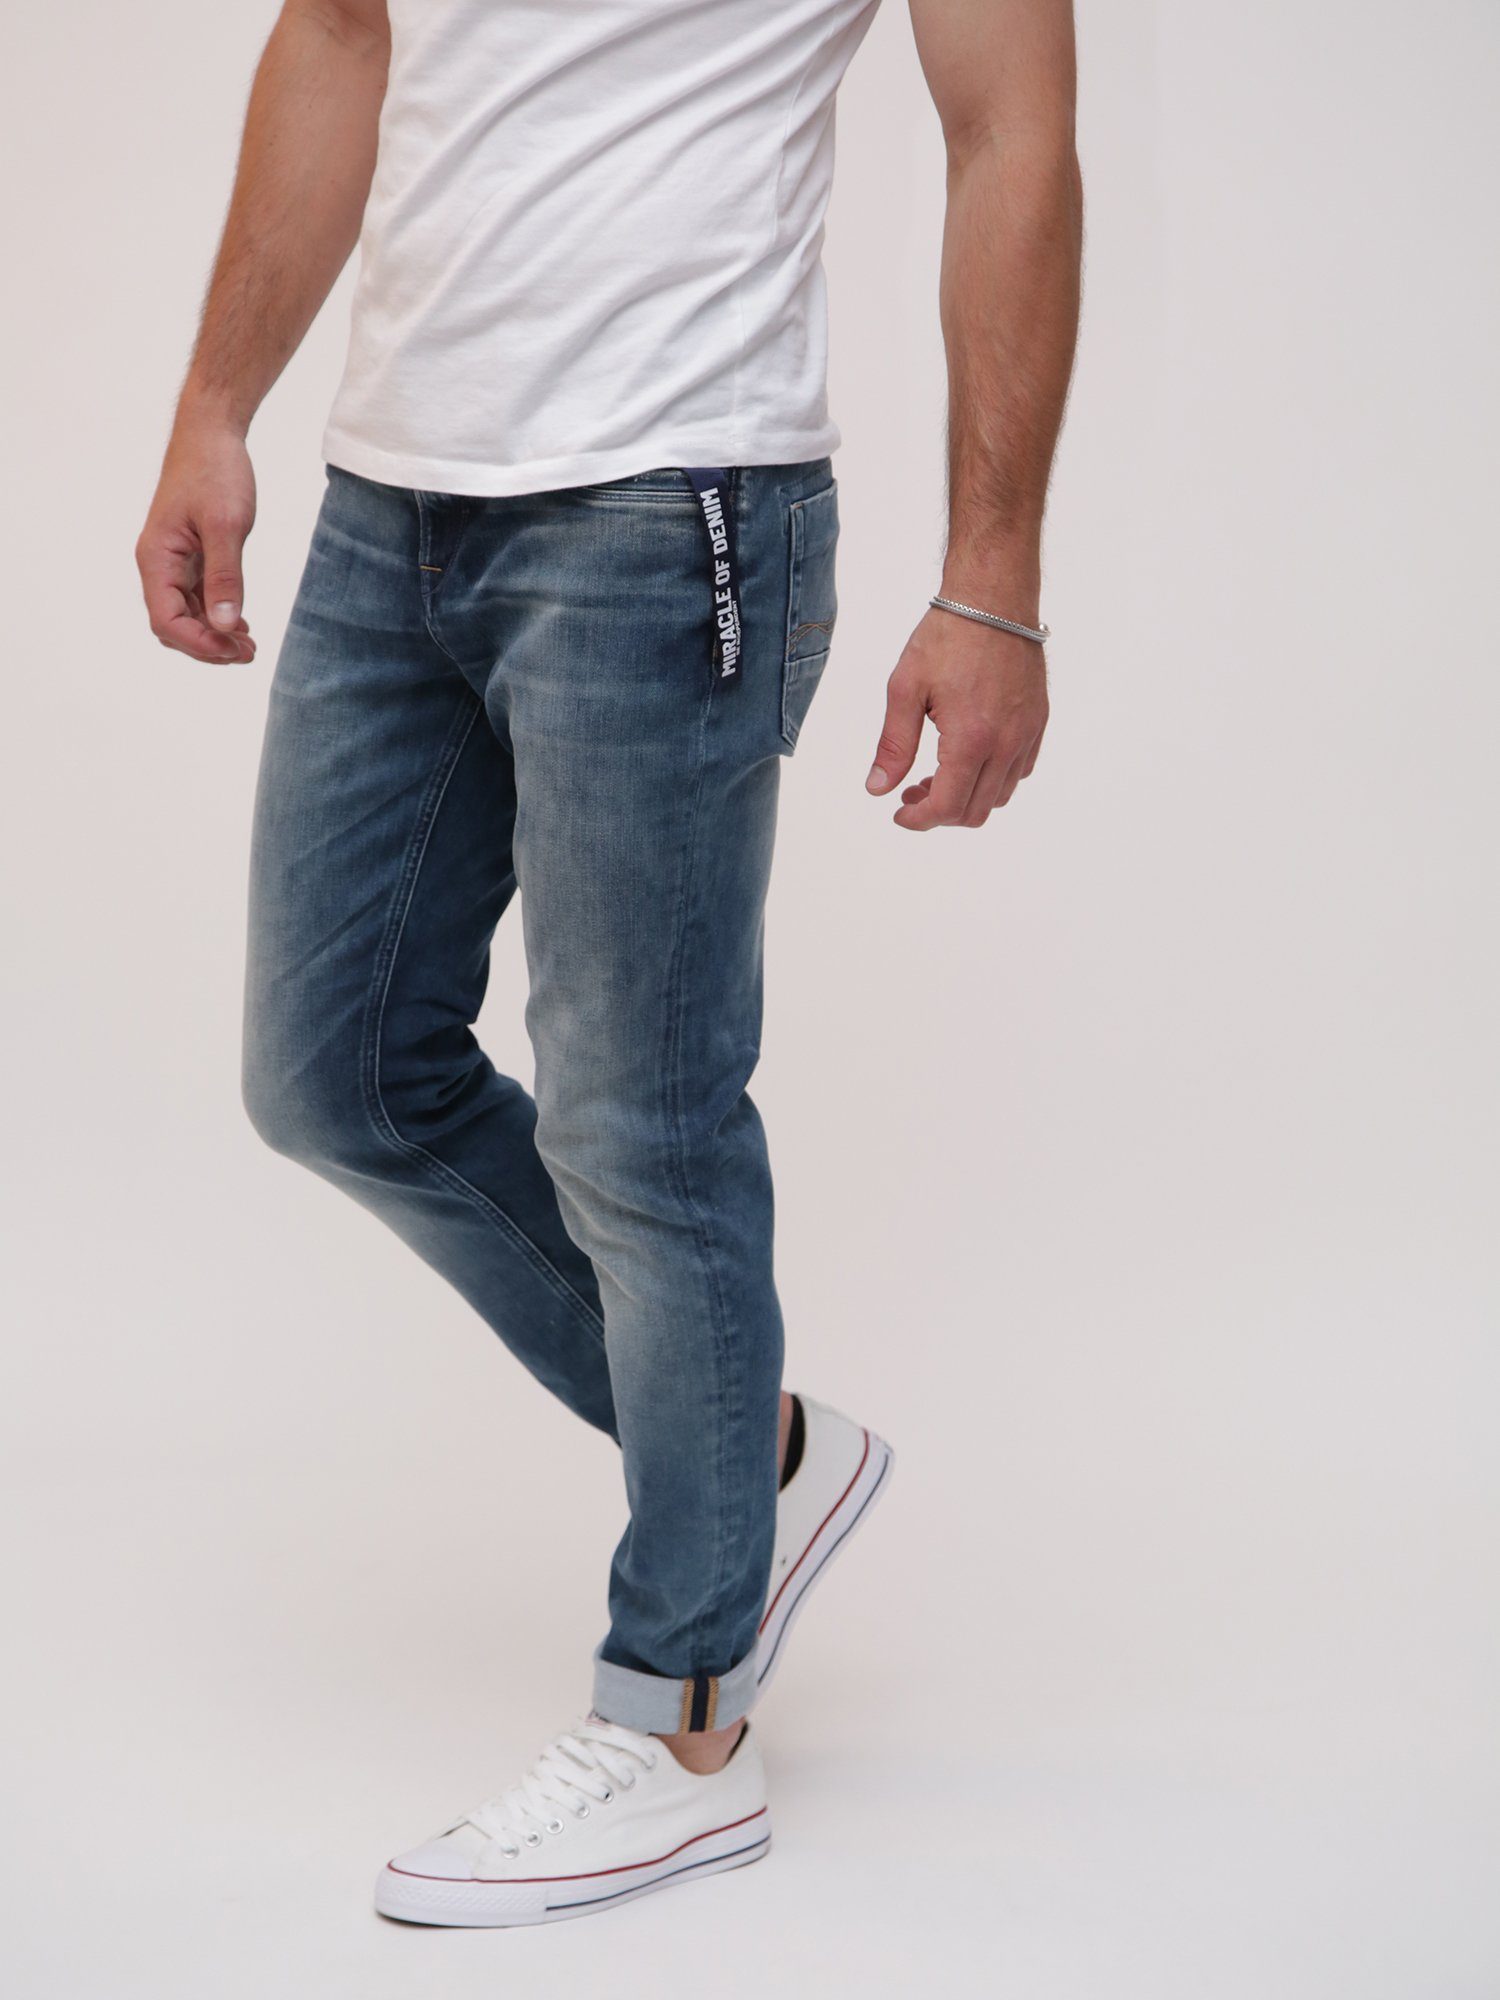 Miracle of Sparrow Marcel Denim BLue Slim-fit-Jeans 5-Pocket-Style Jogg